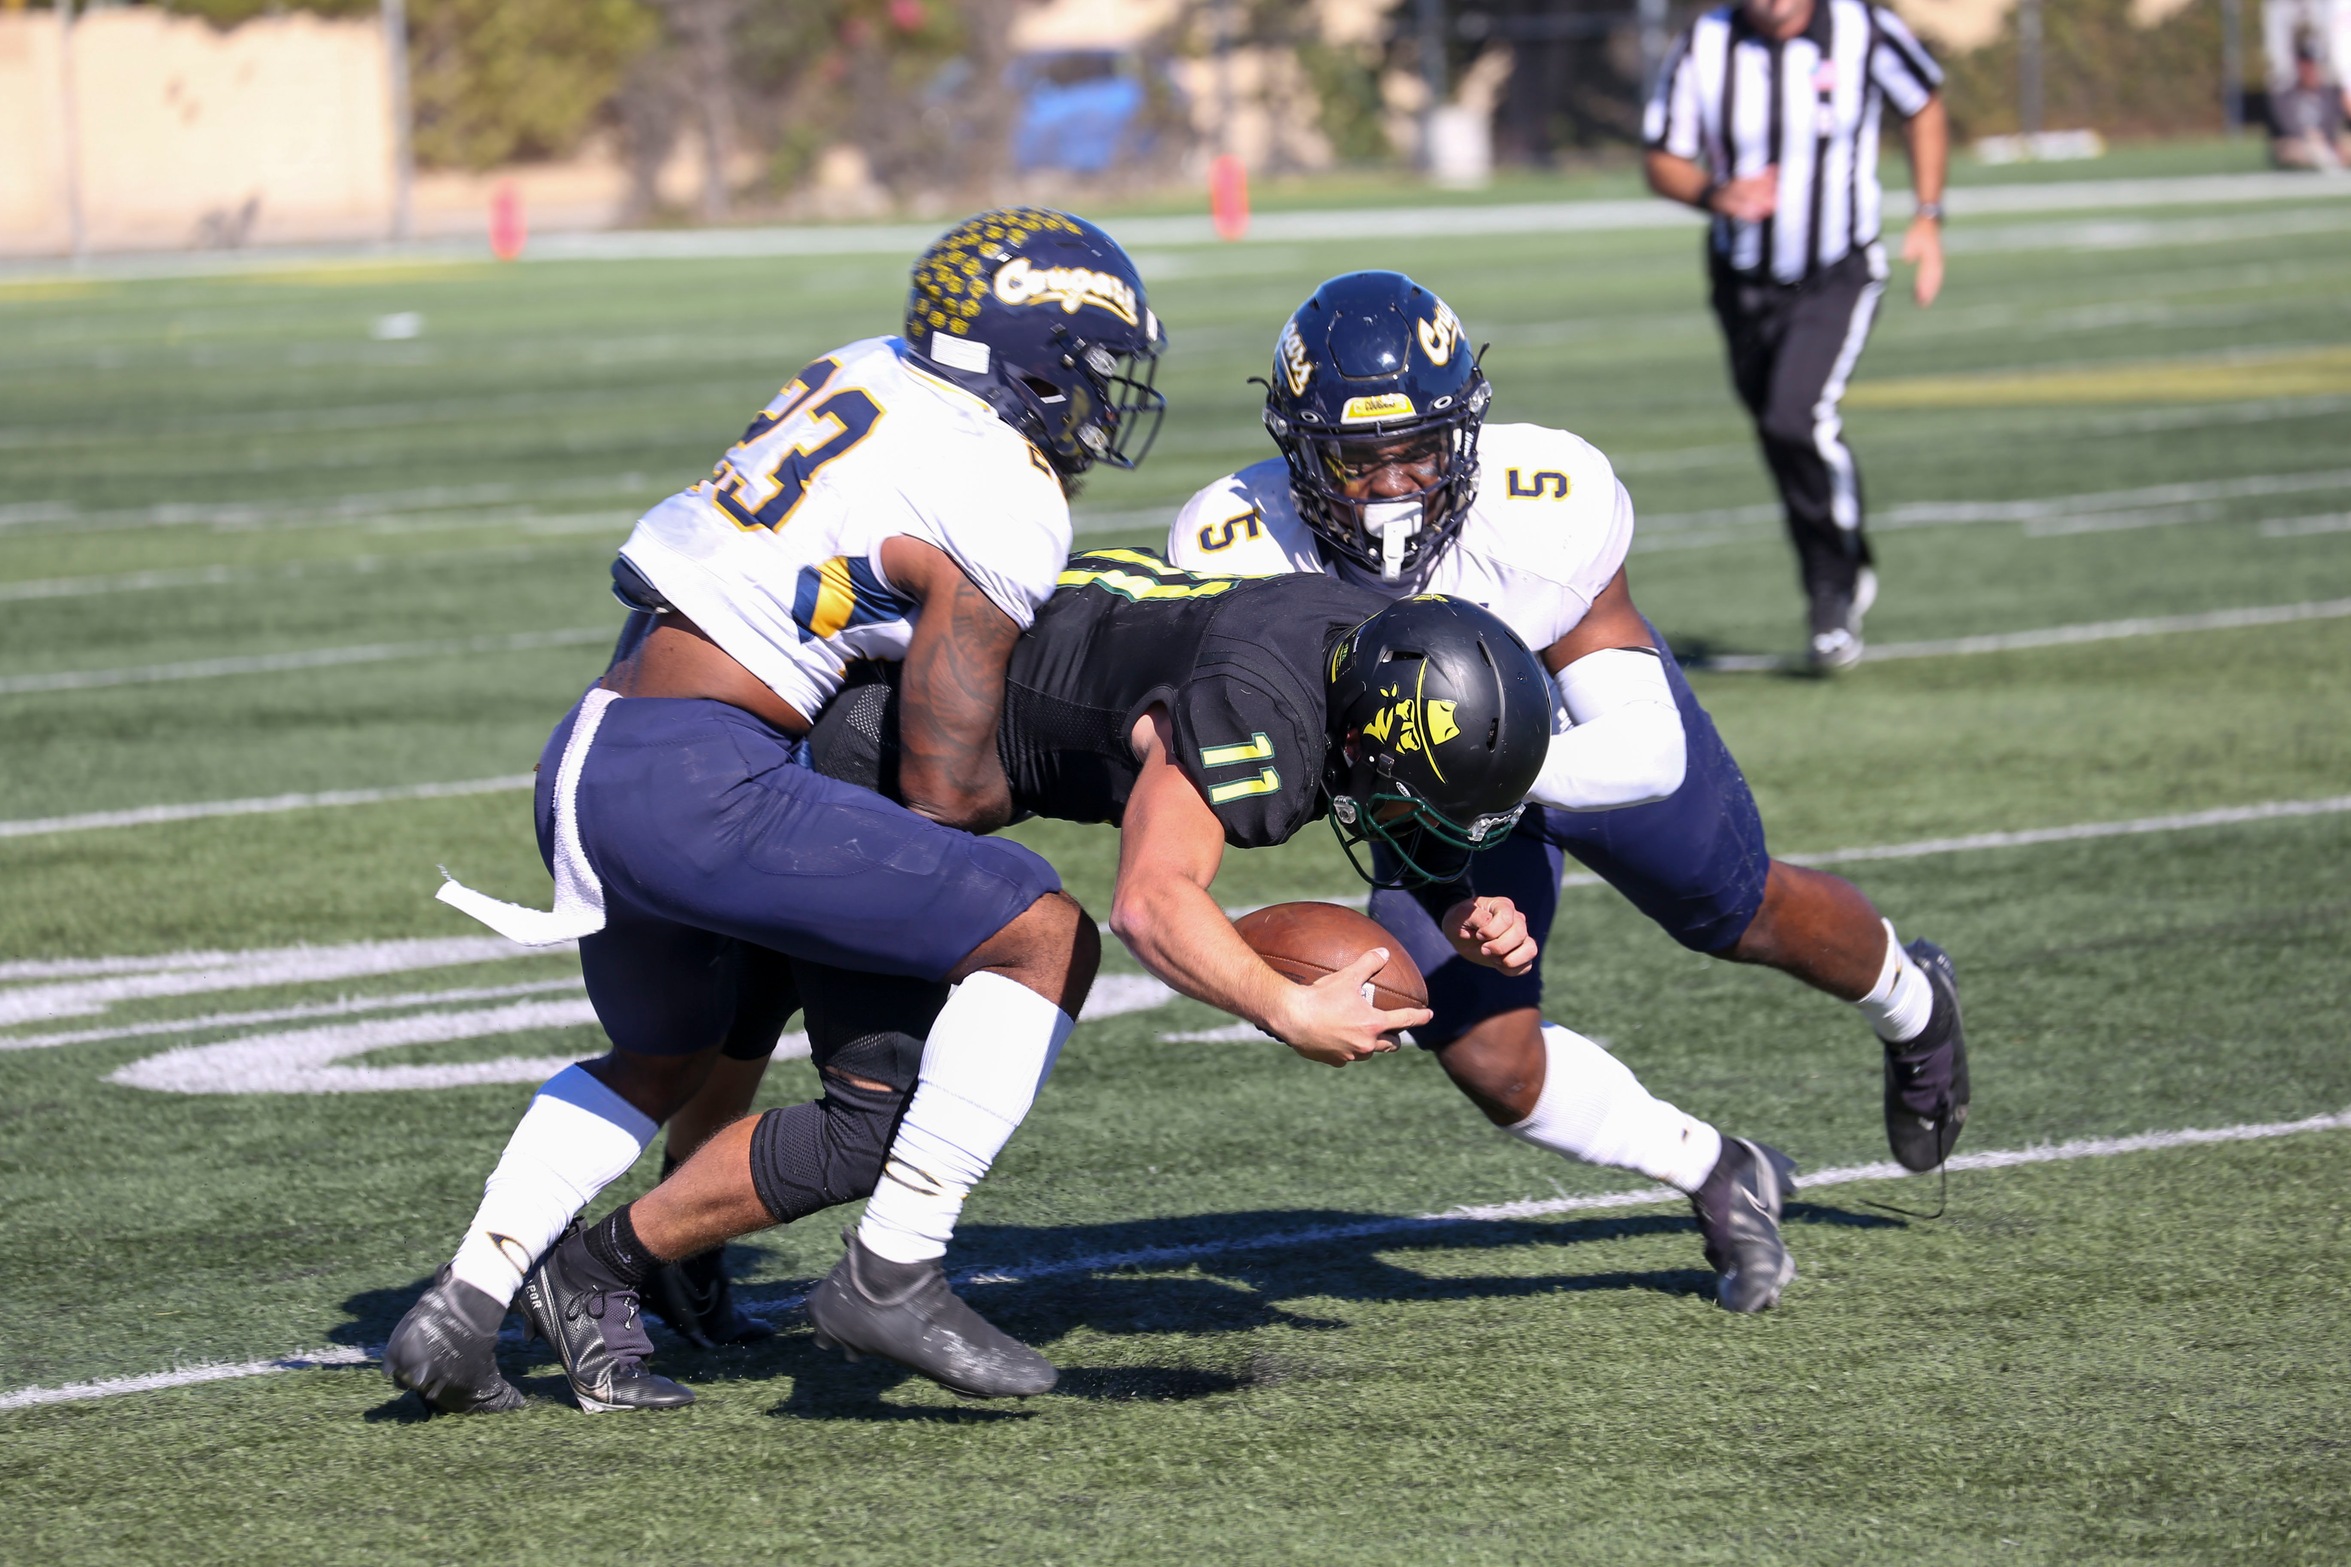 No. 3 seed College of the Canyons suffered a 20-10 postseason defeat at the hands of No. 2 Golden West College on Saturday, despite taking a tie game into the fourth quarter. Canyons has now advanced to the state playoffs in three straight seasons (2018, 2019, 2021) under head coach Ted Iacenda. &mdash; Jesse&nbsp;Mu&ntilde;oz/COC Sports Information